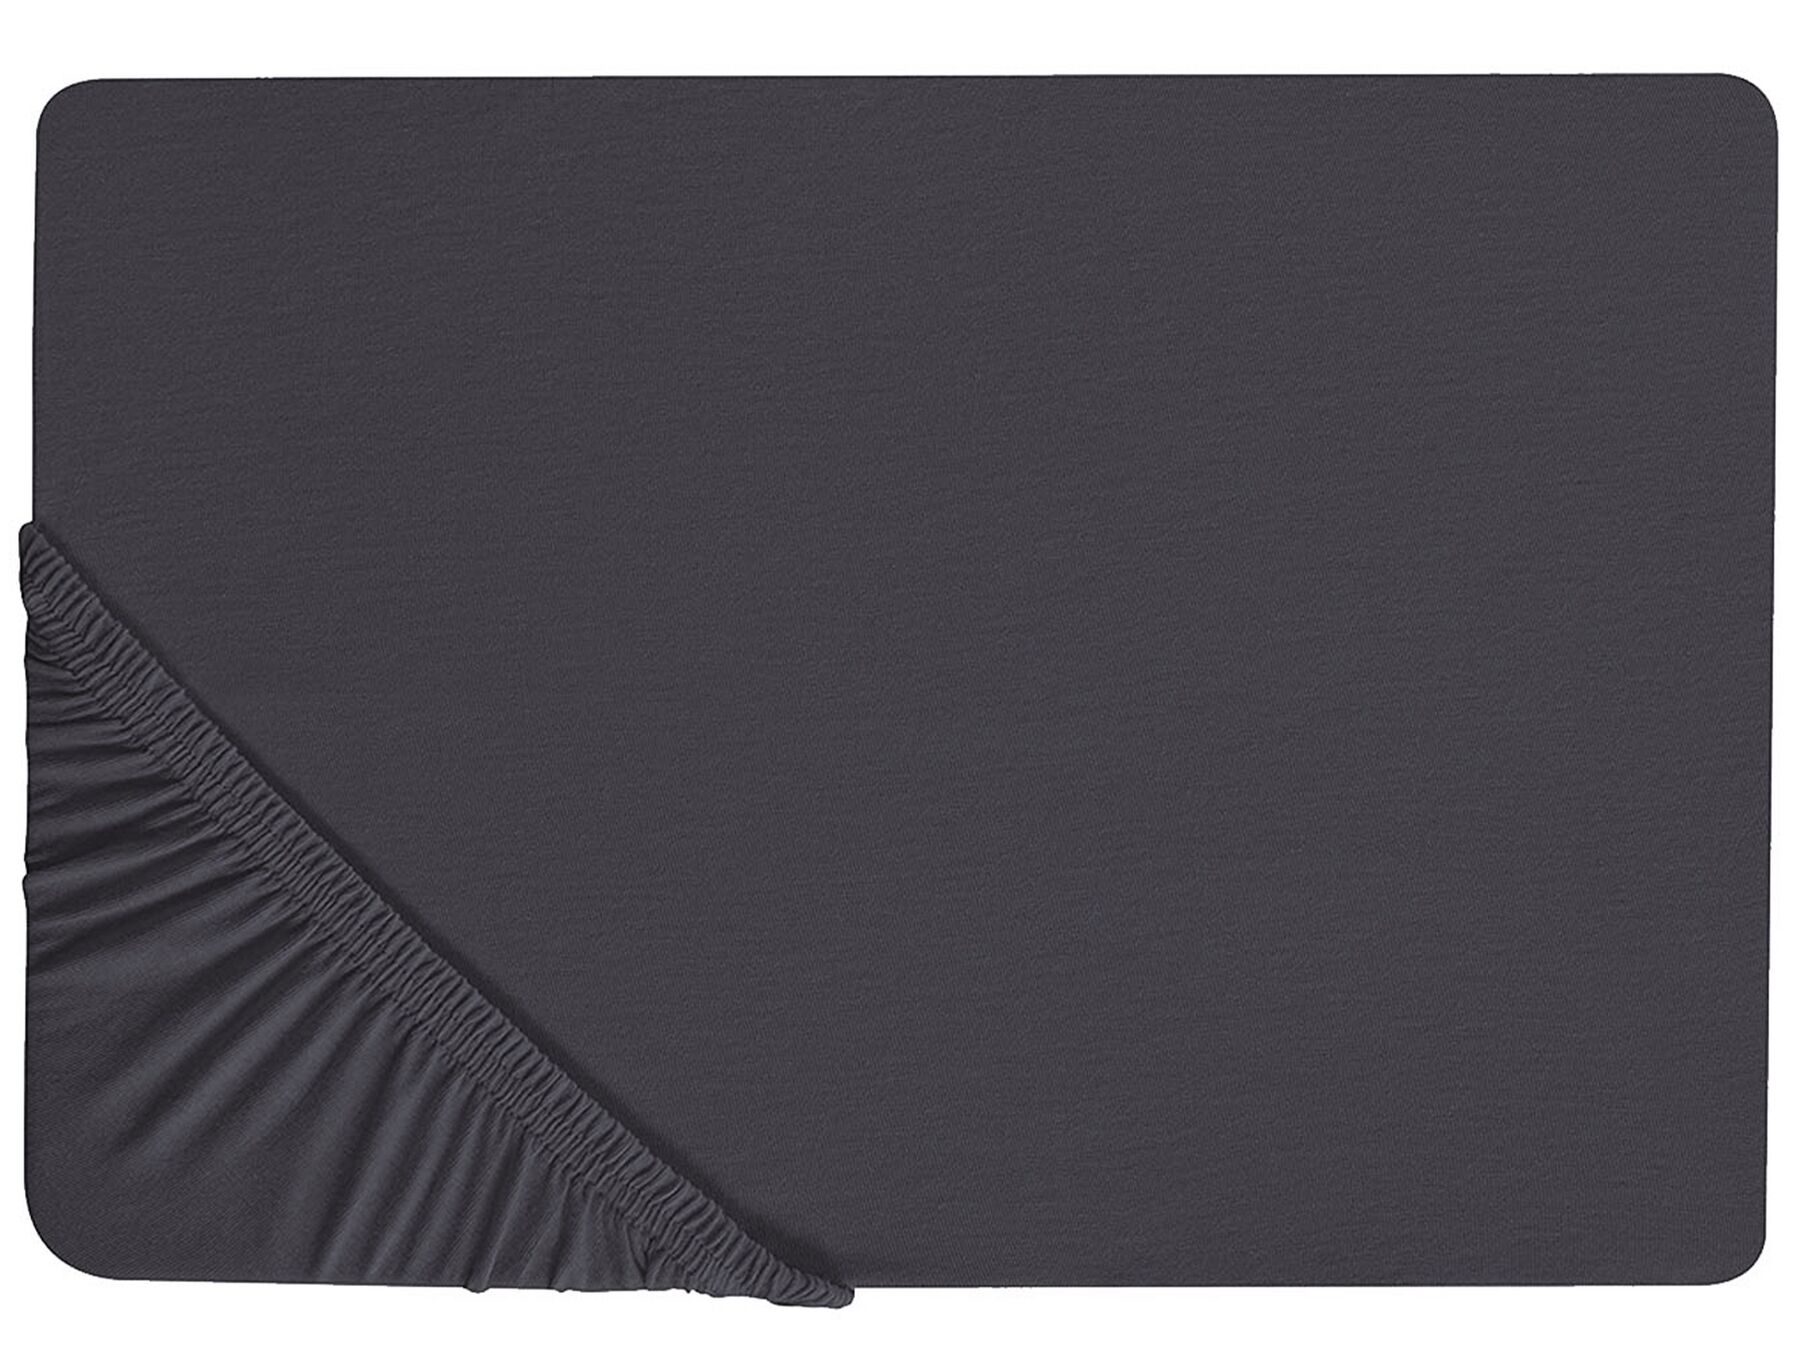 Cotton Fitted Sheet 200 x 200 cm Black HOFUF_815924